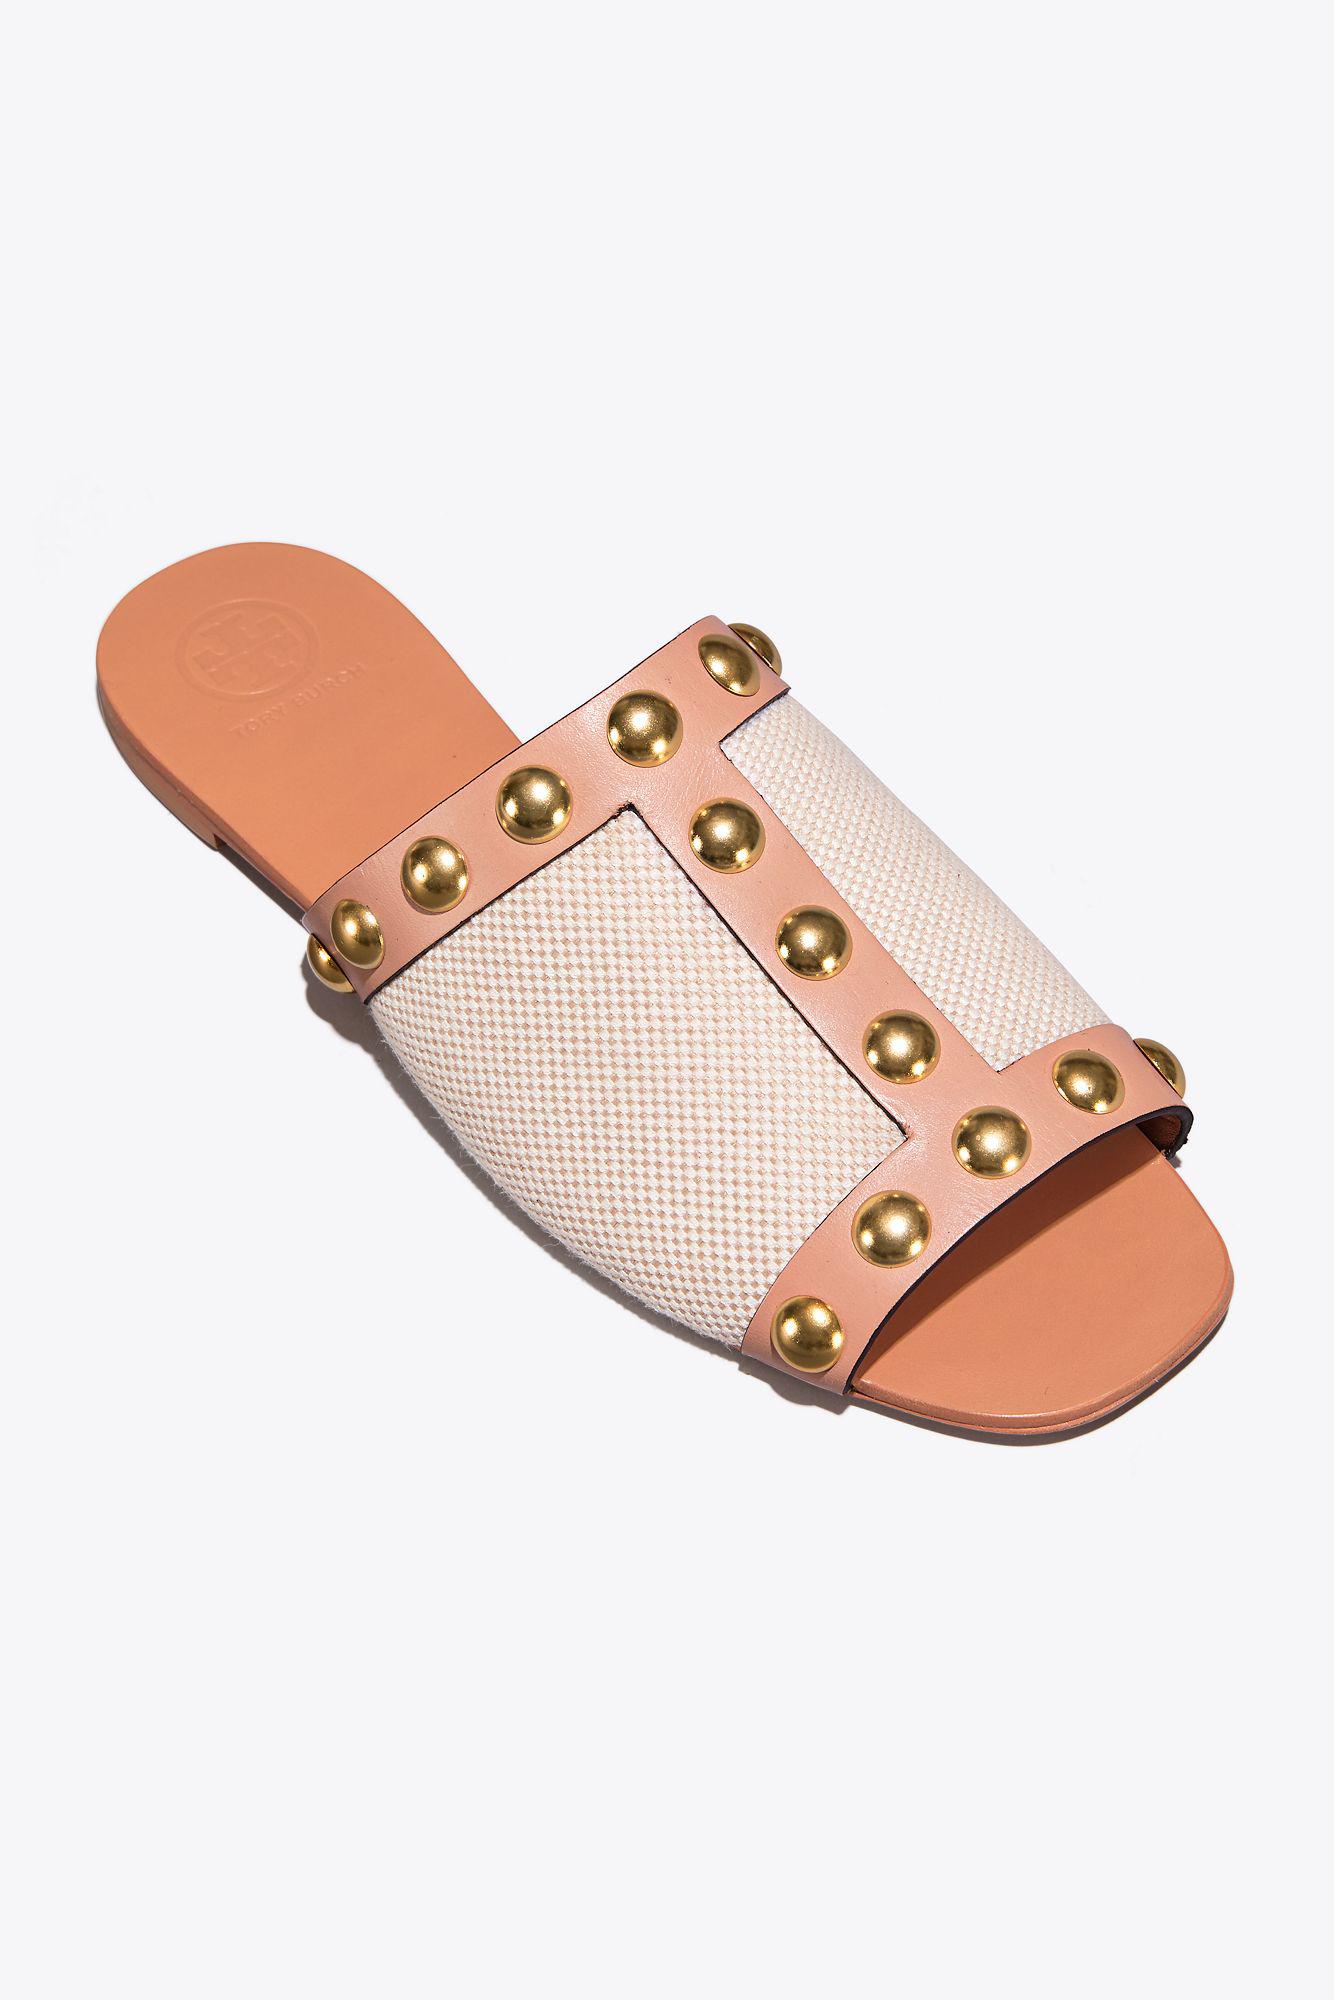 Tory Burch Canvas Blythe Slide in 